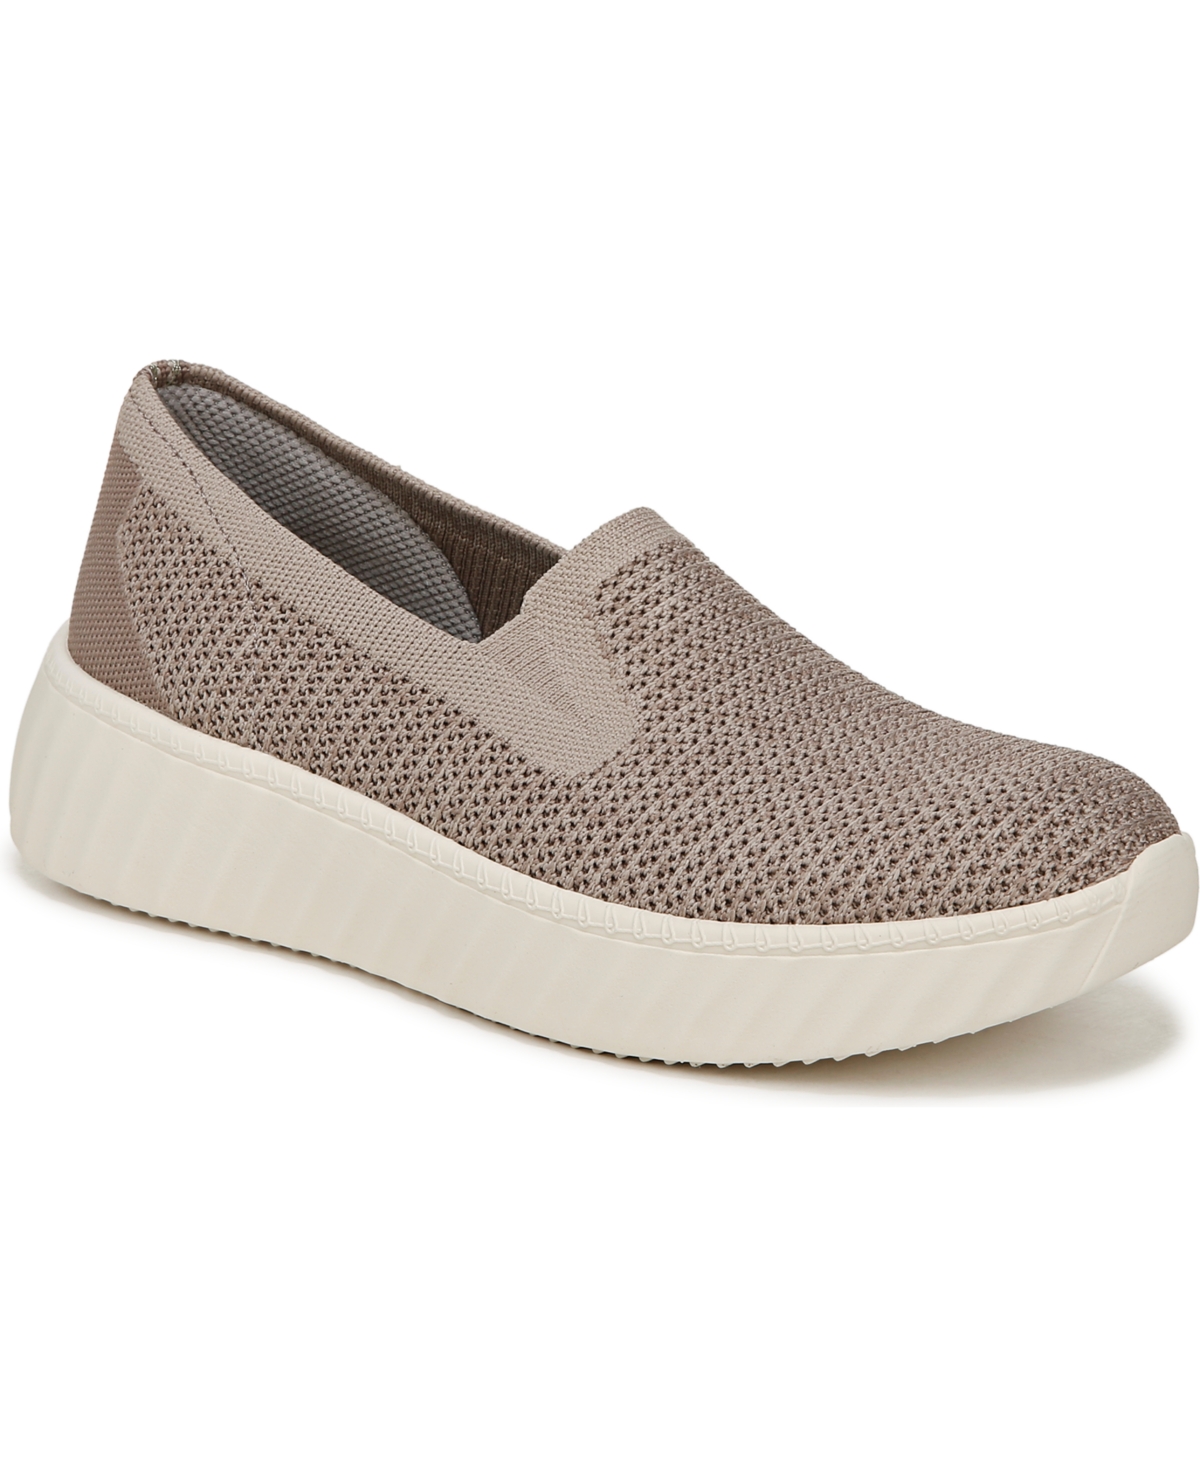 Wednesday Washable Slip Ons - Simply Taupe Heathered Knit Fabric